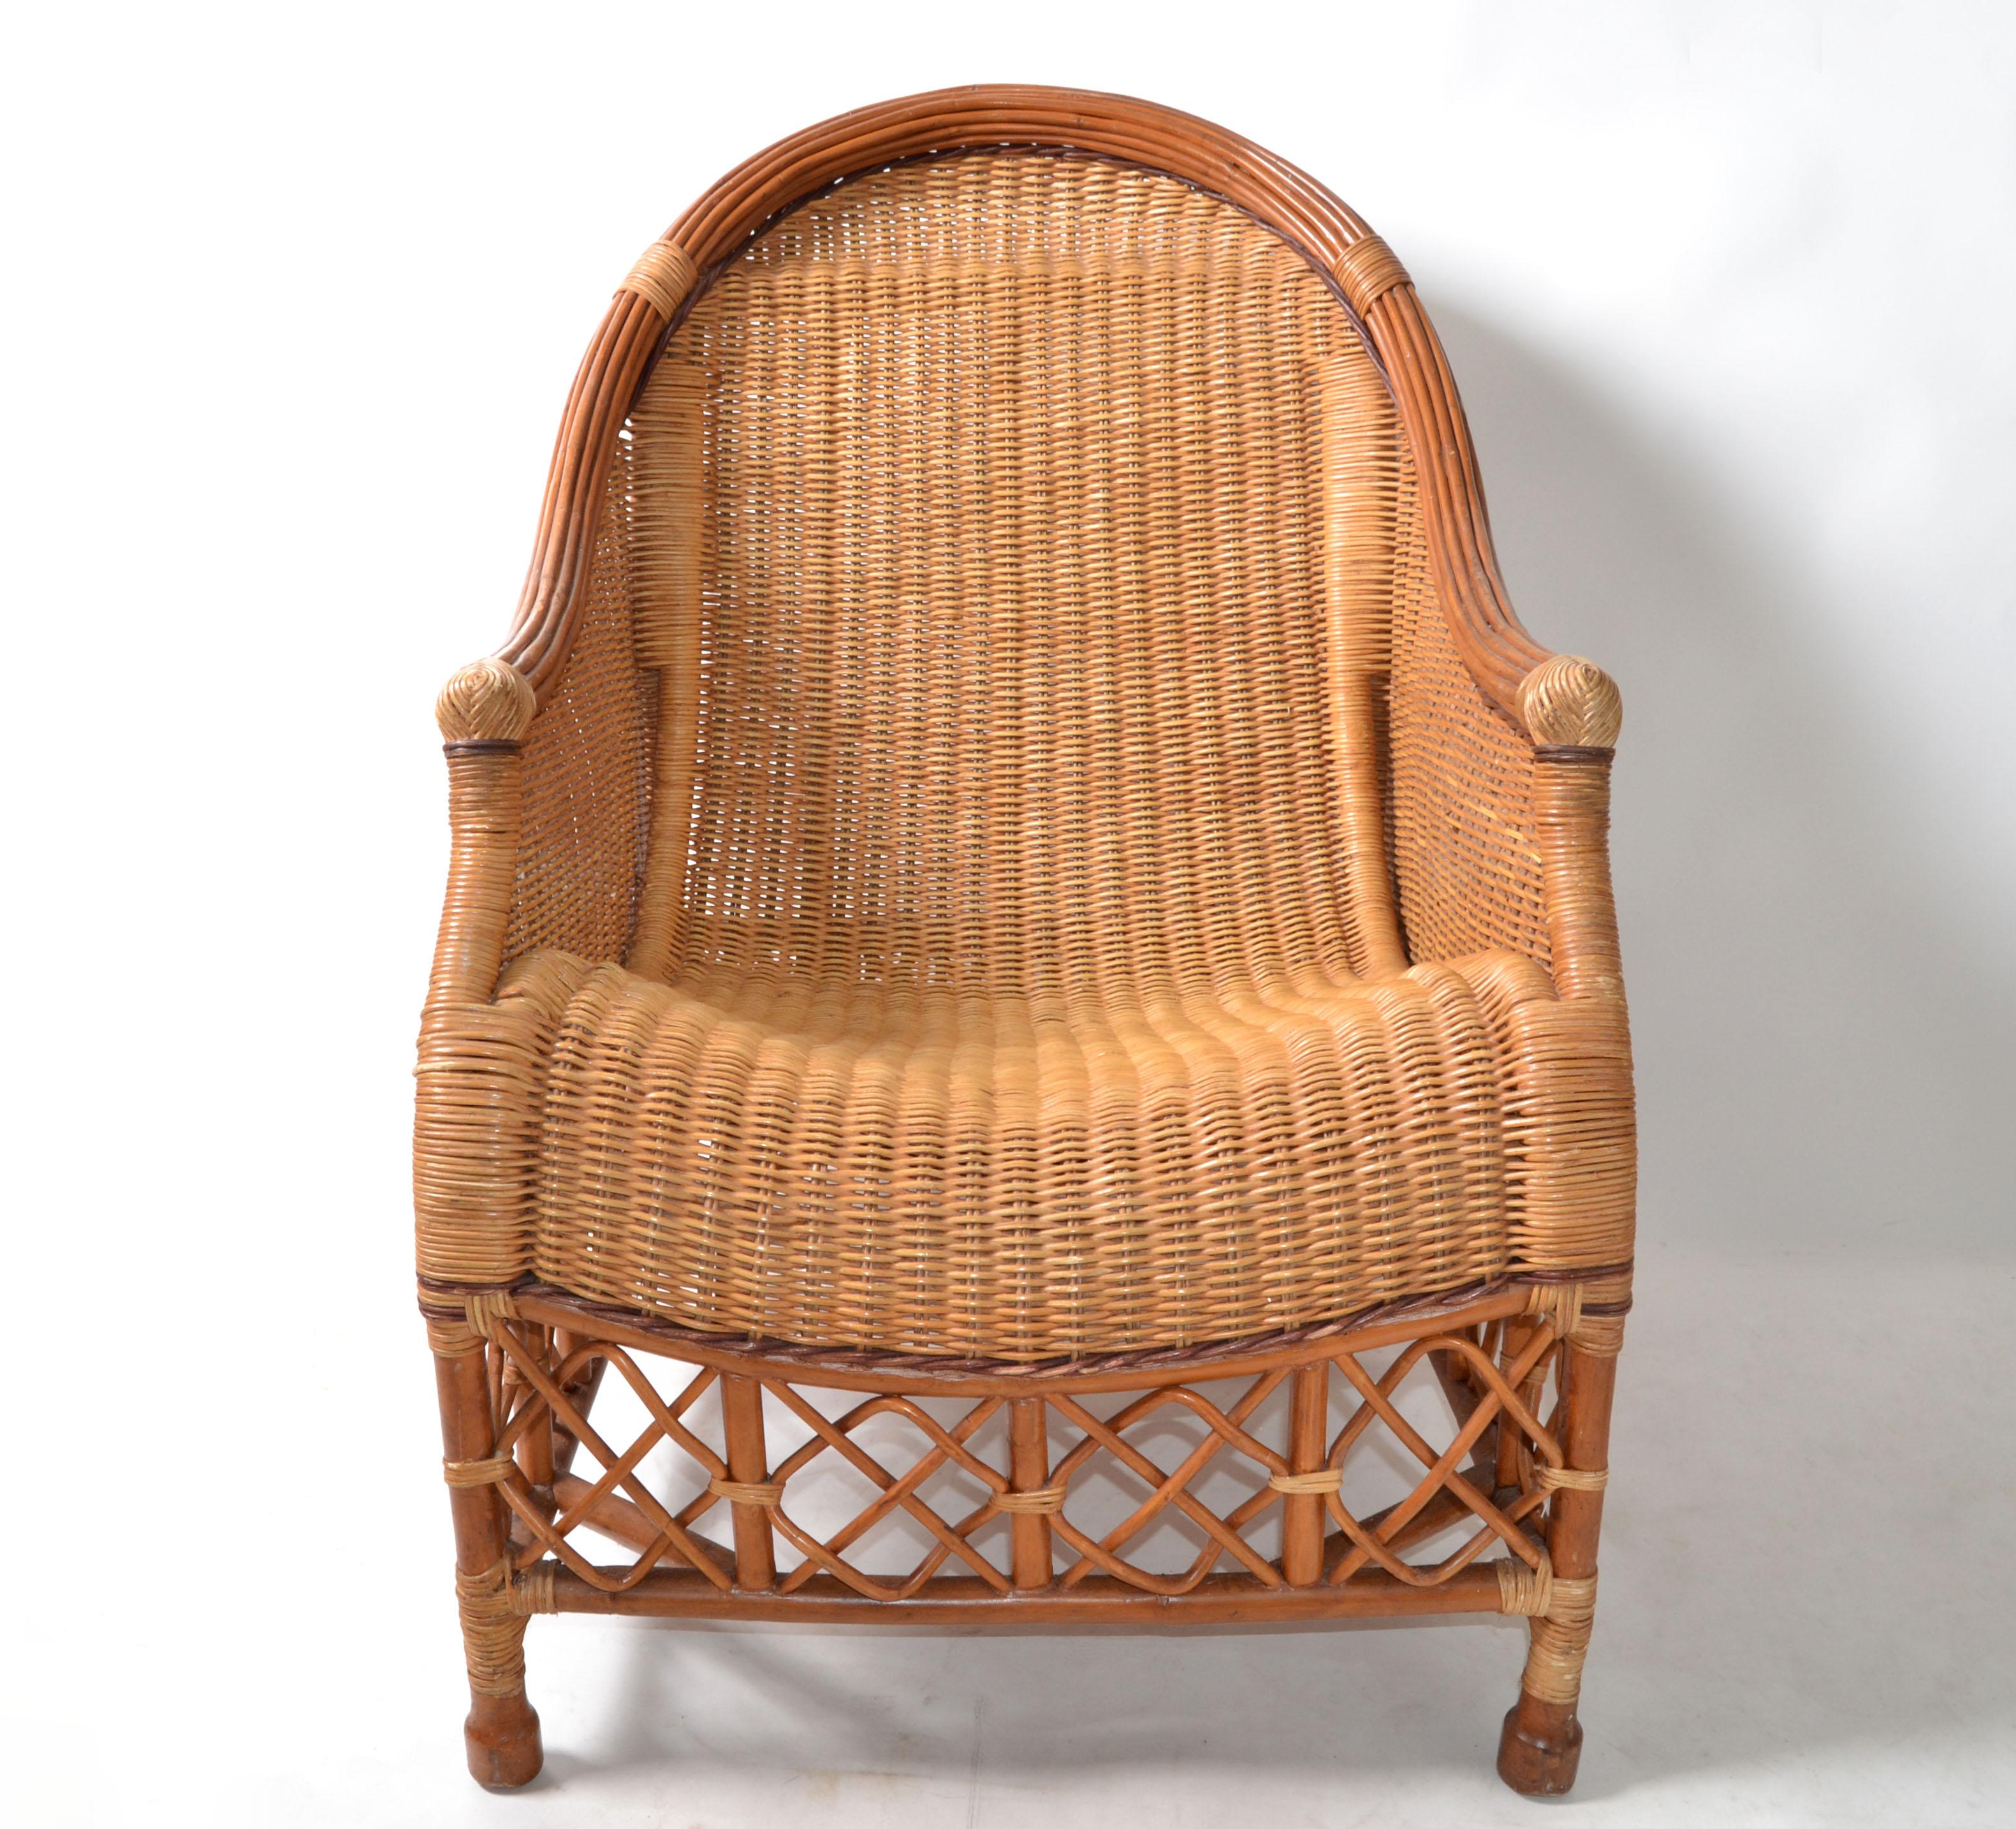 Bamboo, Cane & Wicker Lounge Chair Handwoven Bohemian 1960 Mid-Century Modern For Sale 8